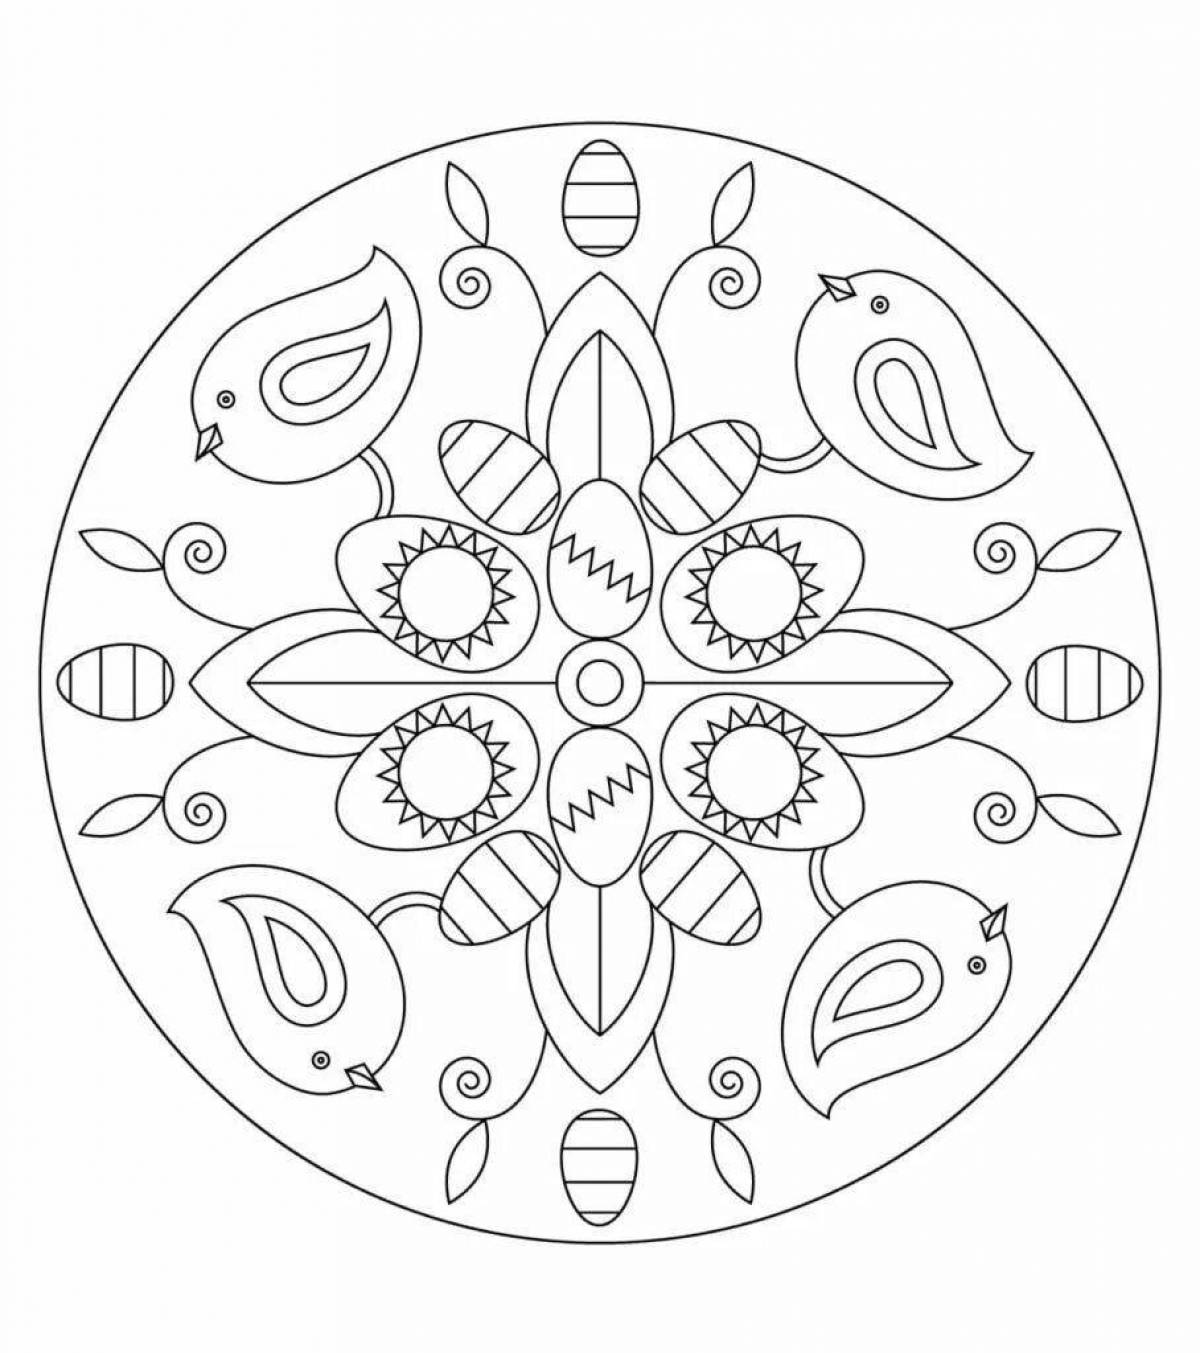 Game coloring mandalas for children 5-6 years old